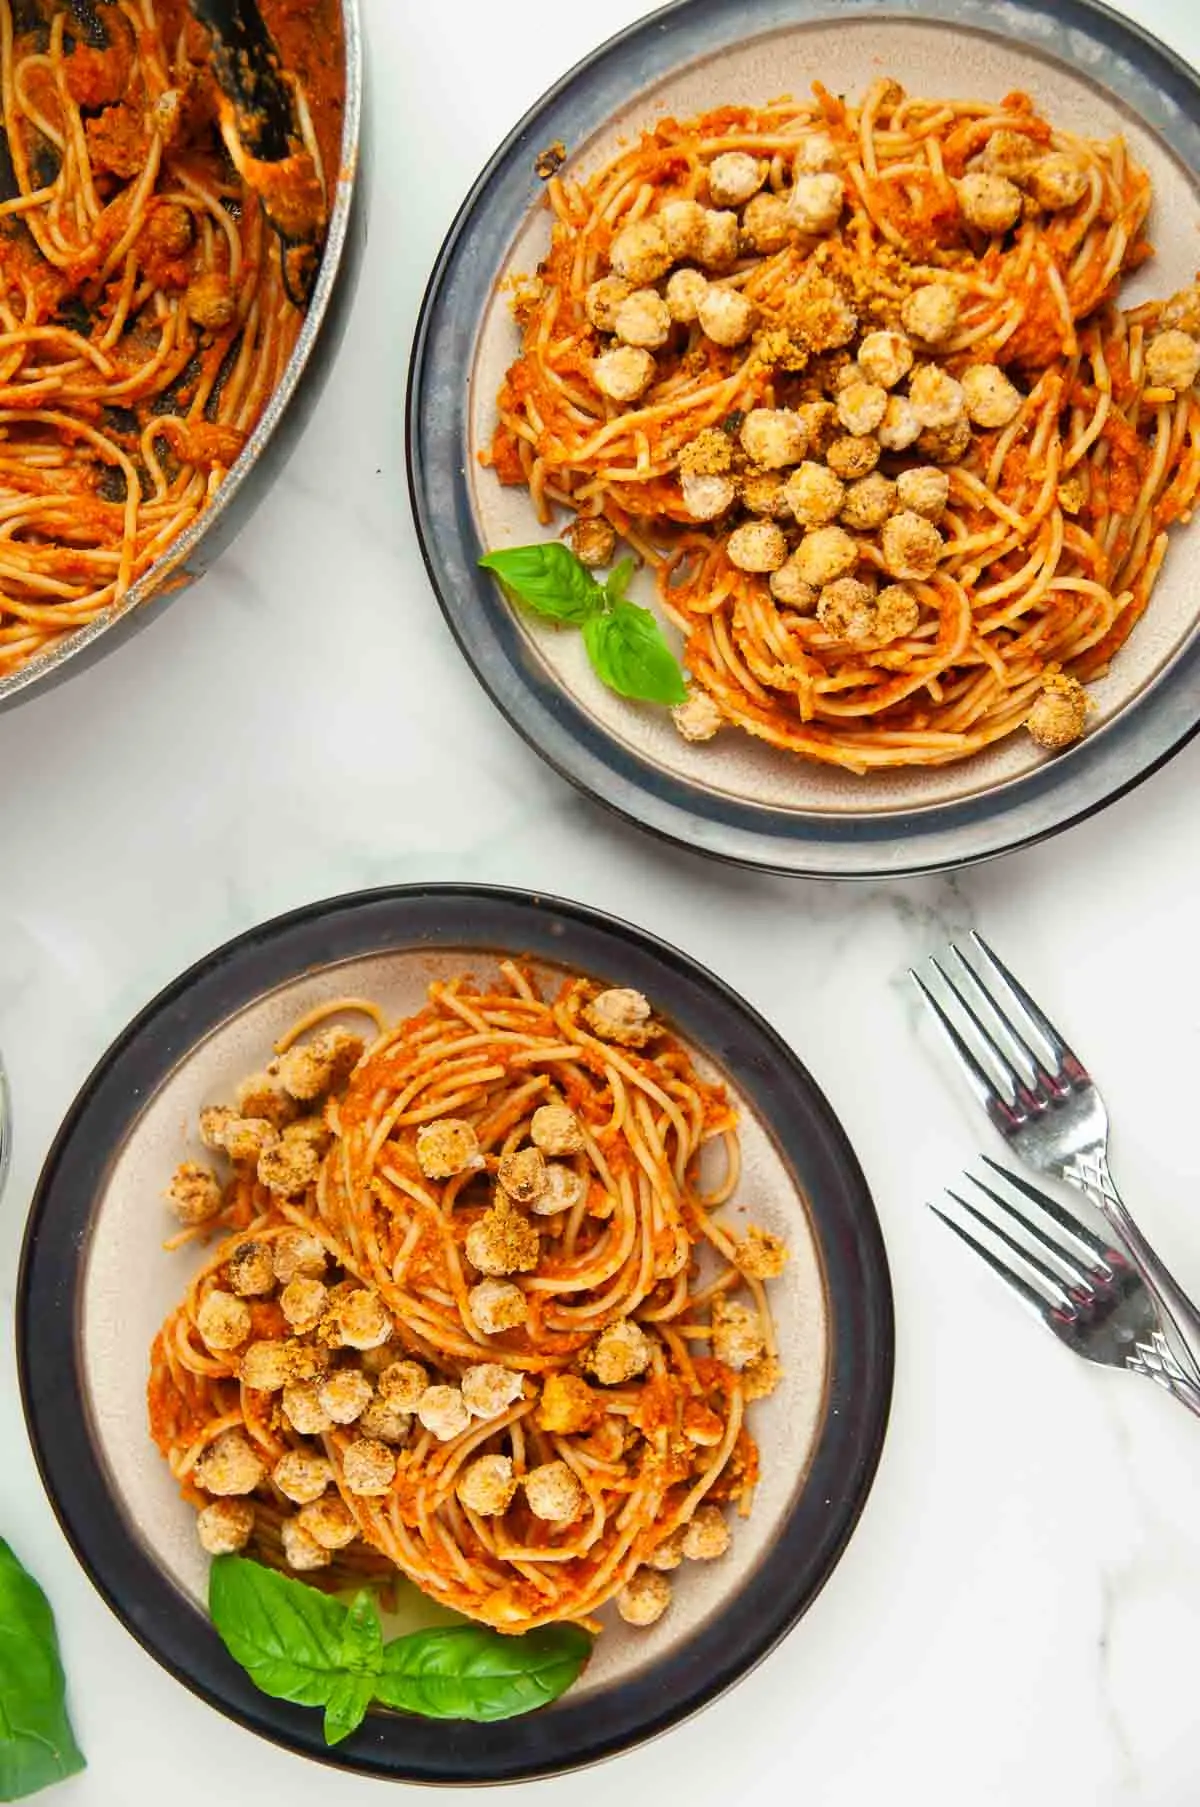 Pasta with Chickpeas (Pasta e Ceci) is a bite of heaven in an easy vegetarian, budget friendly, rustic Italian dinner. Ready in under 30 minutes!